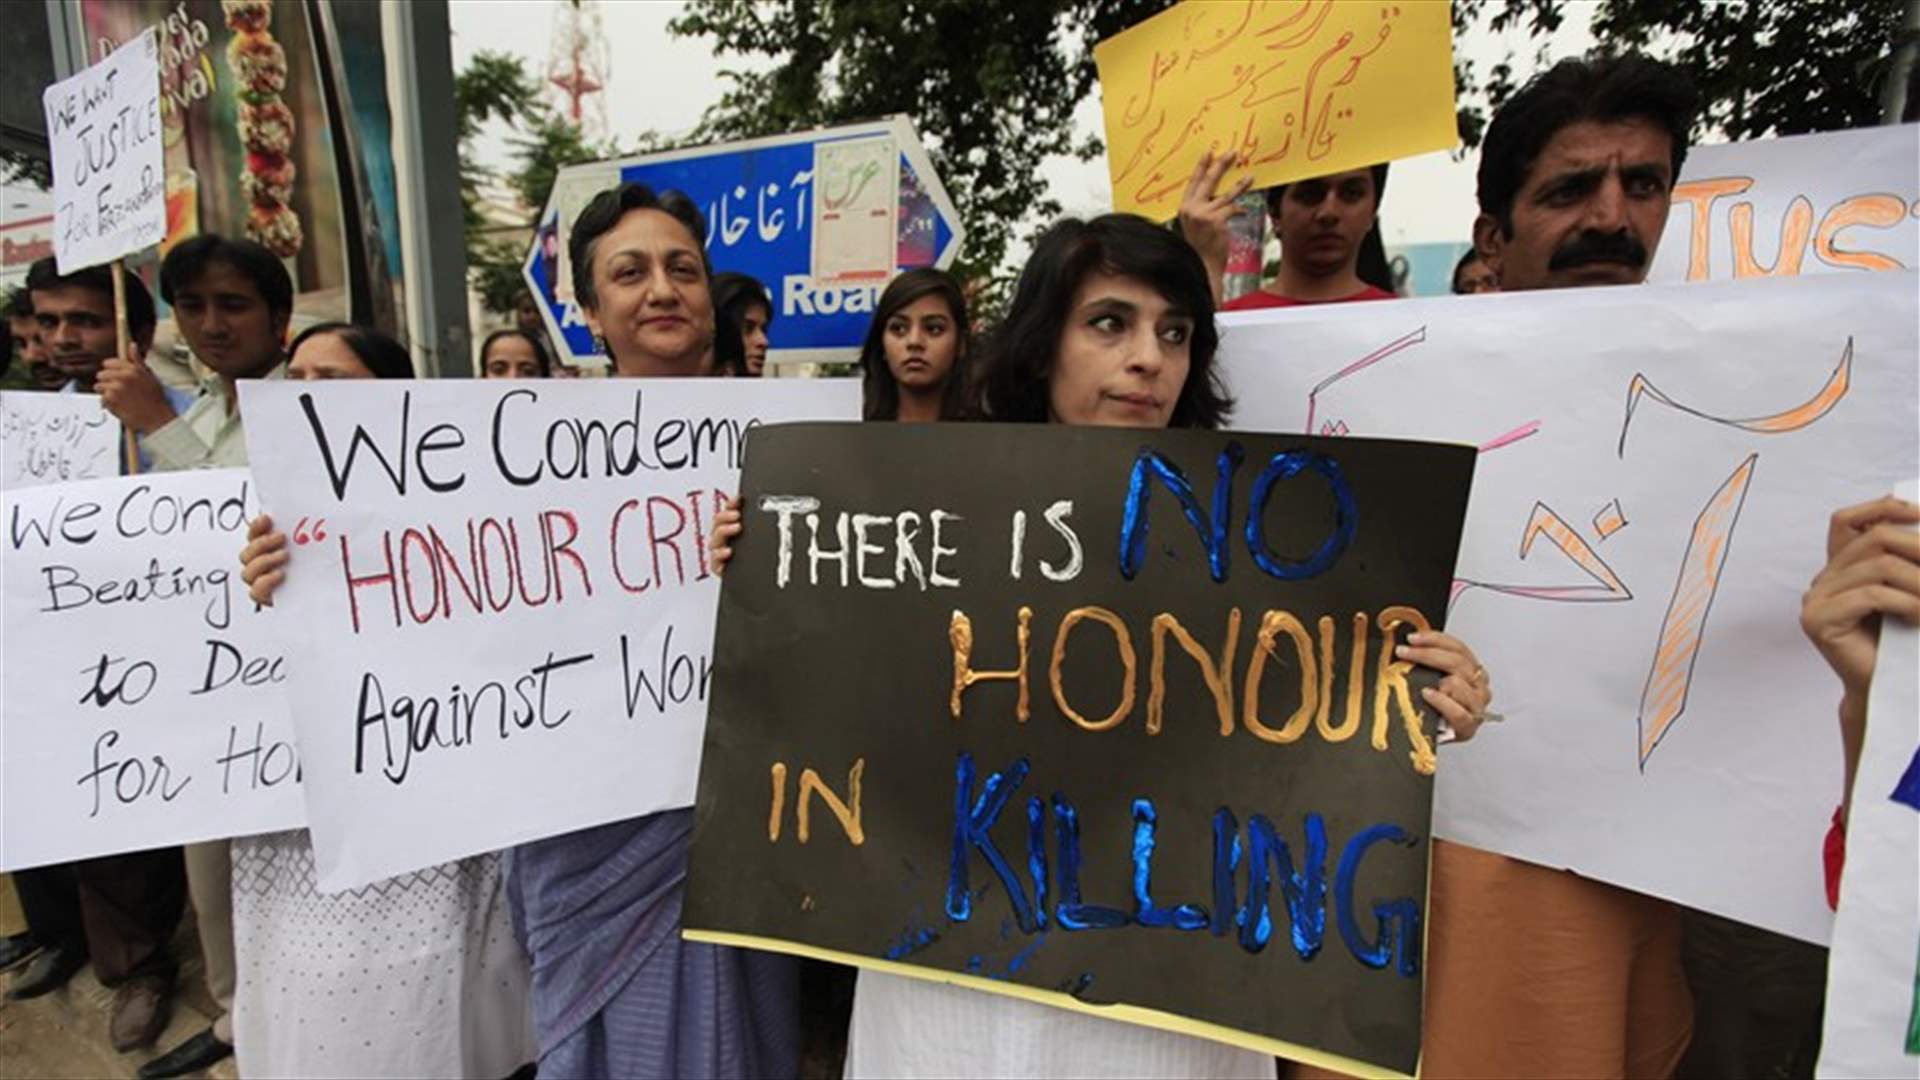 Pakistan to pass law against honor killings in weeks - PM&#39;s daughter